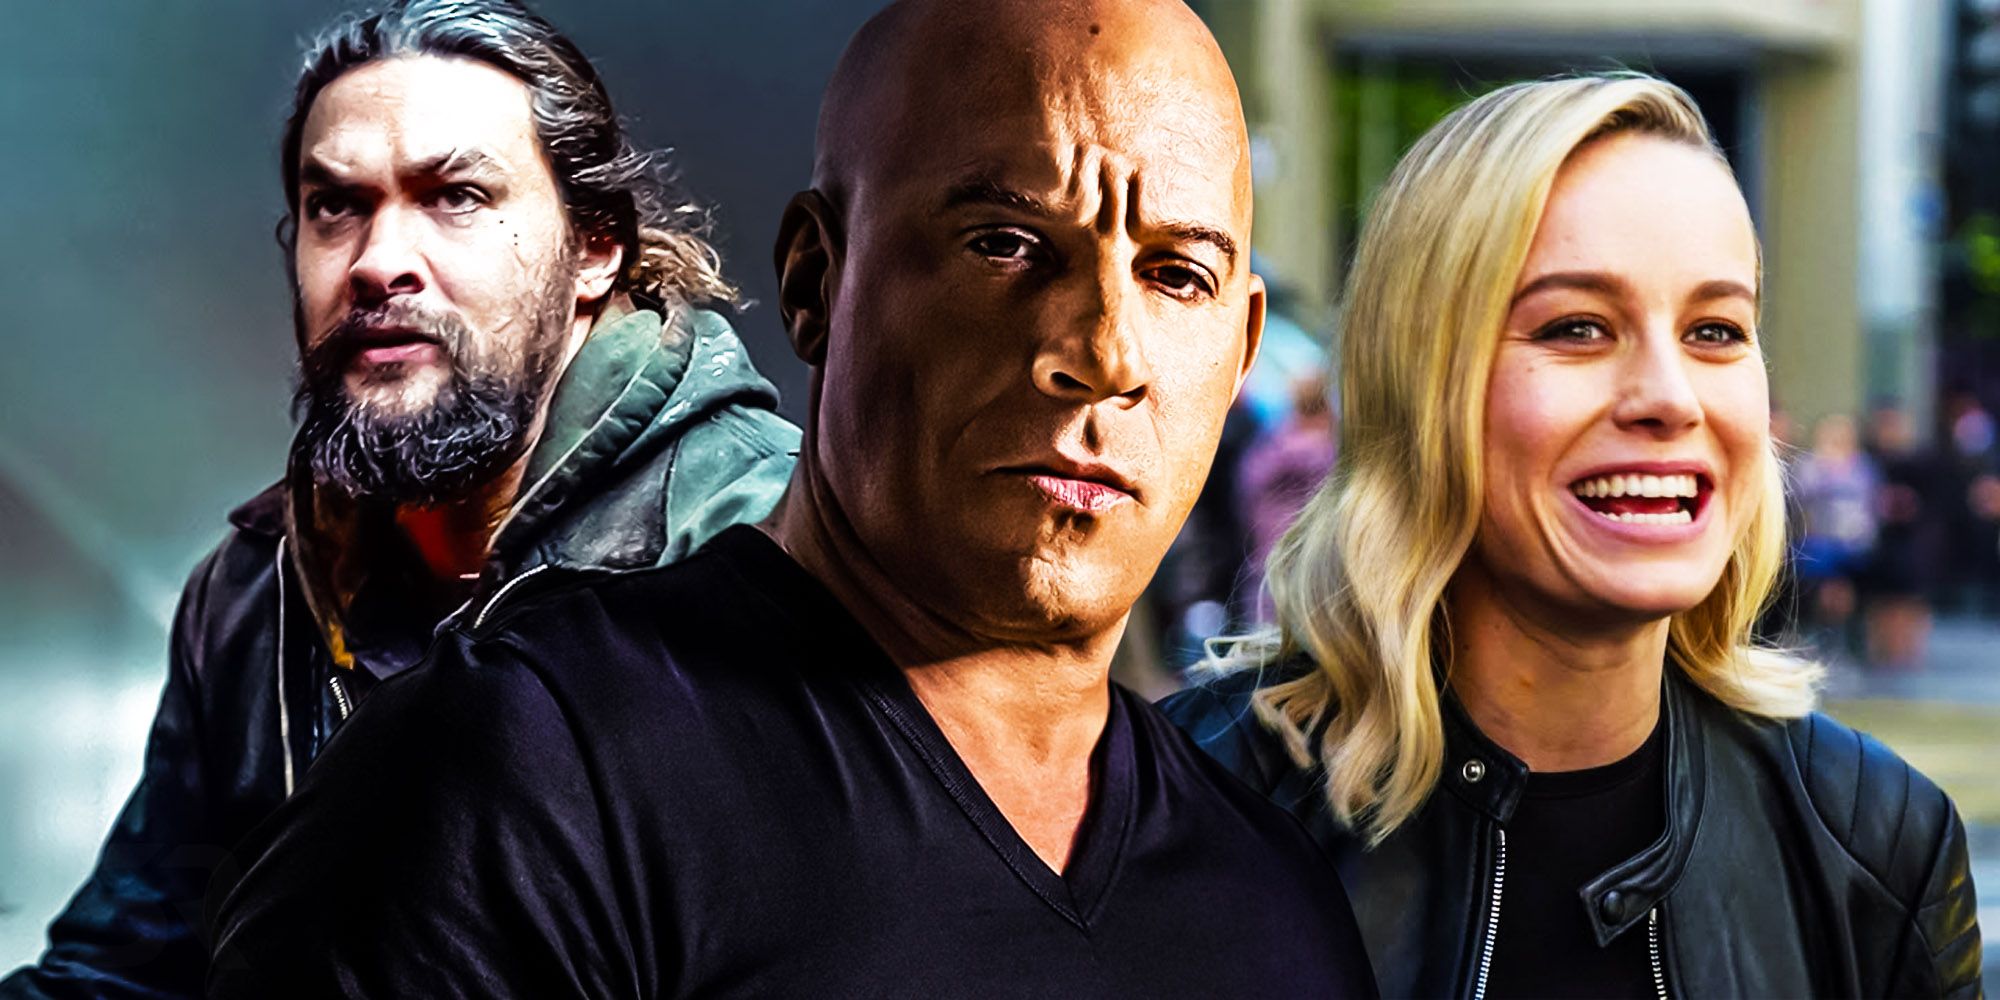 Jason Momoa, Vin Diesel, and Brie Larson in Fast and Furious 10